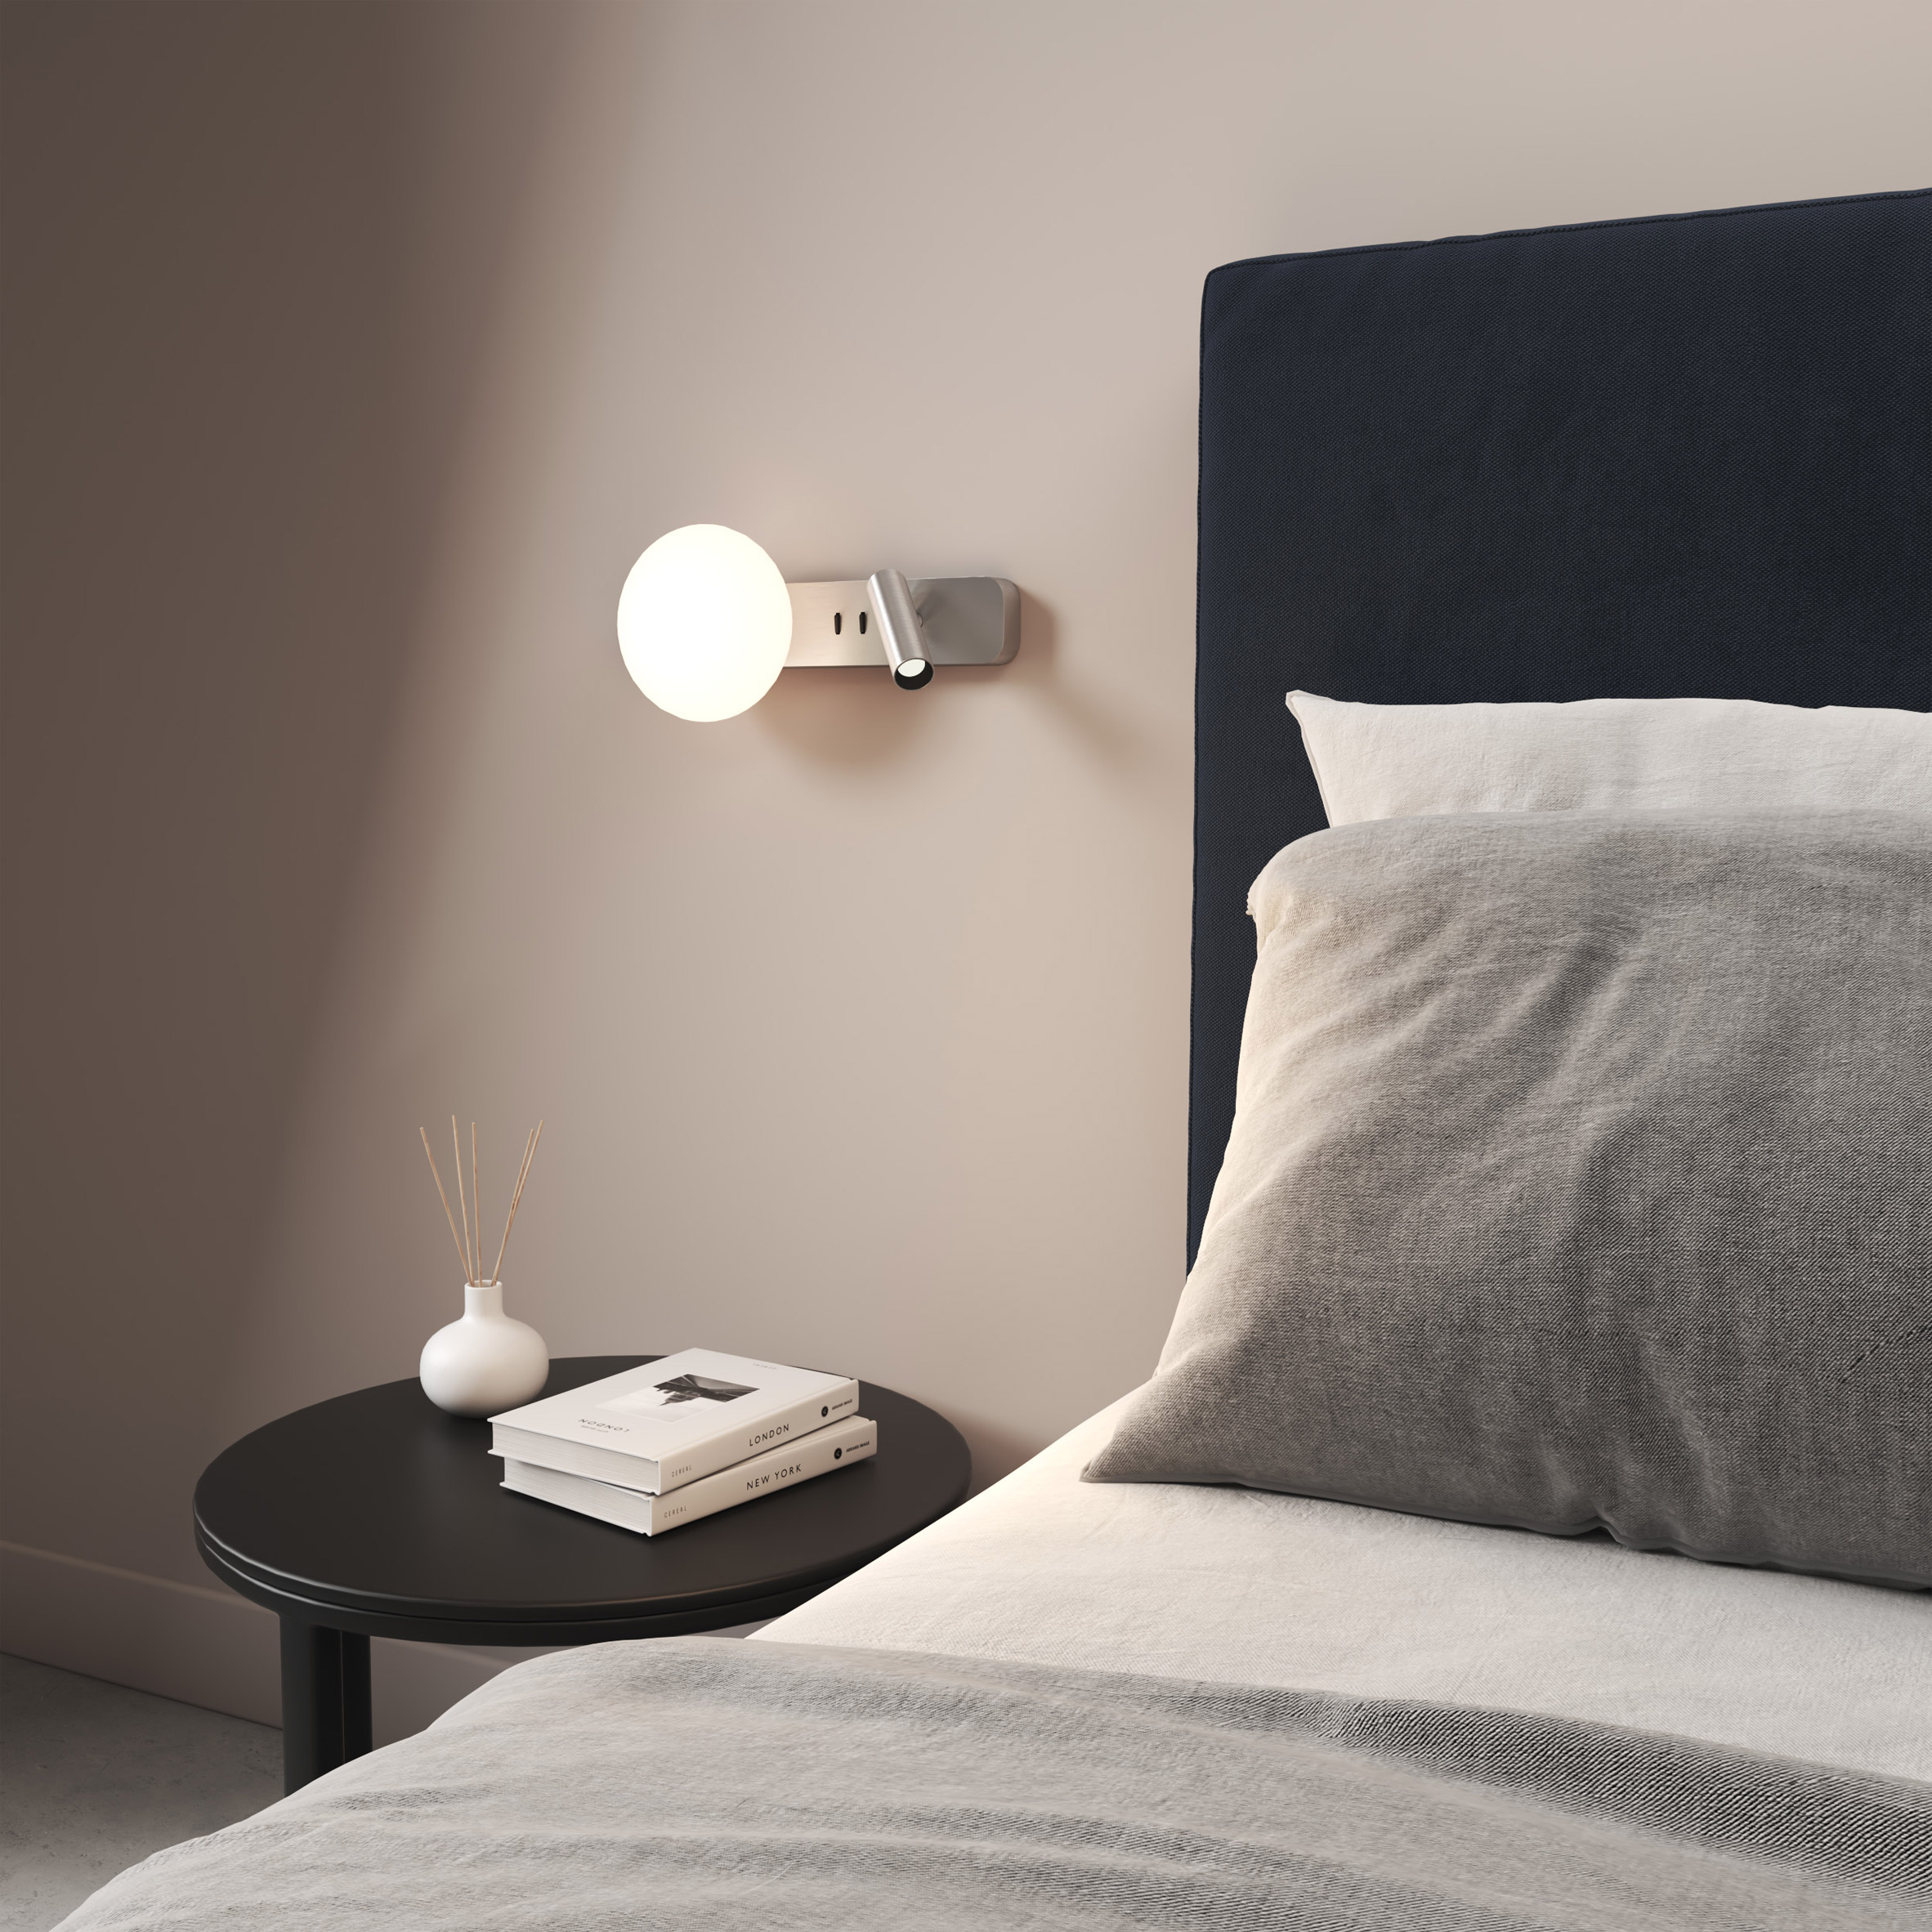 A photograph of a circular Reader edit light, which was presented on Dezeen Showroom, mounted on a wall next to a bed